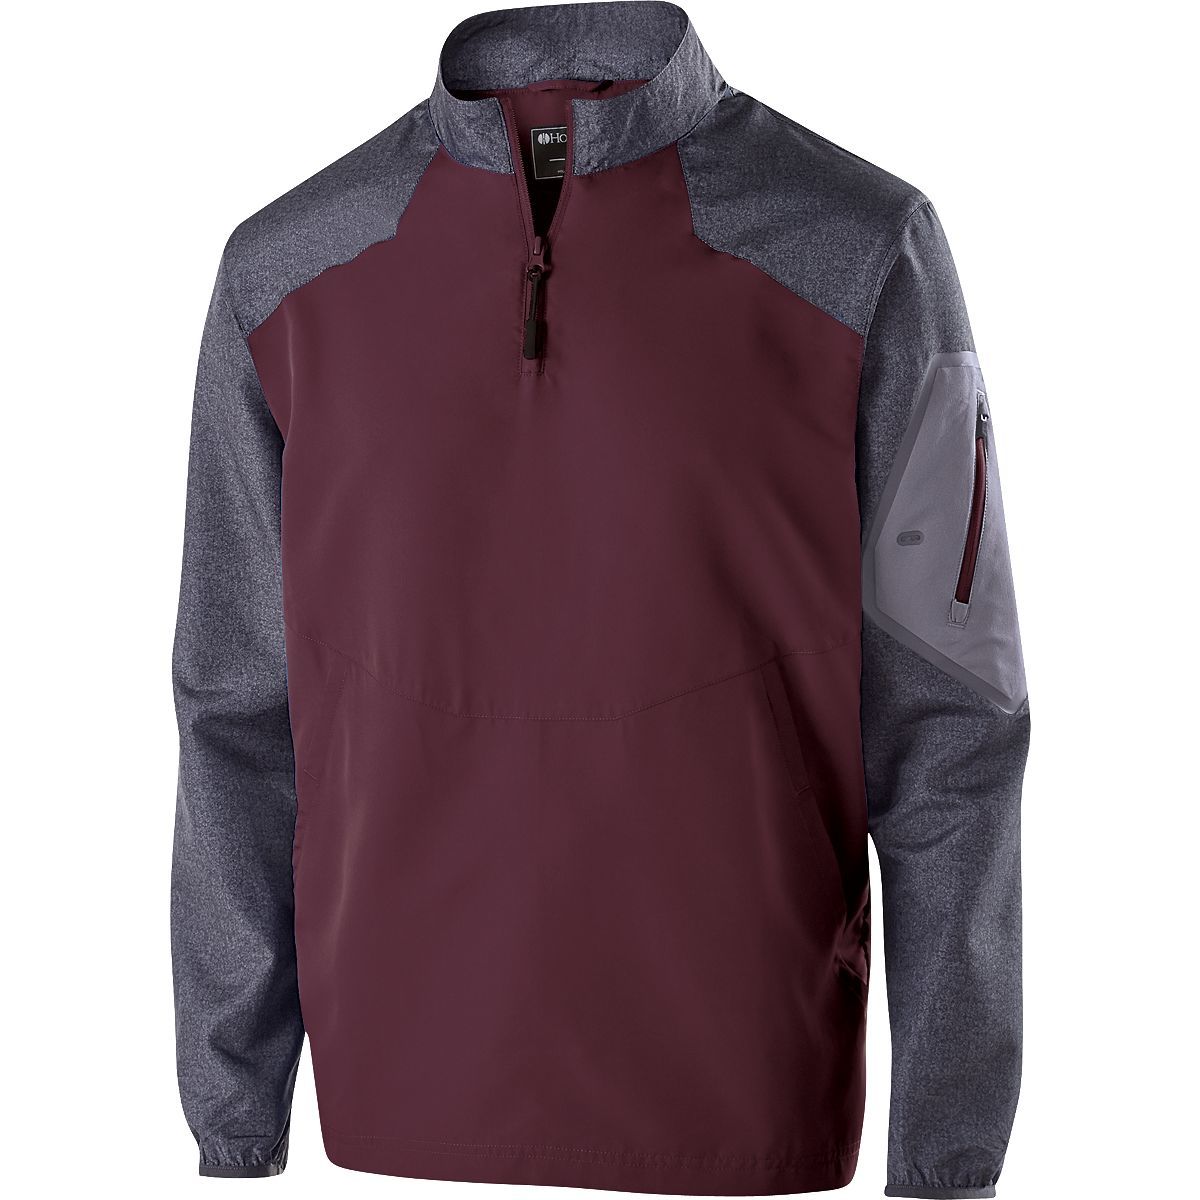 Holloway Raider Pullover in Carbon Print/Maroon  -Part of the Adult, Adult-Pullover, Holloway, Outerwear, Corporate-Collection product lines at KanaleyCreations.com